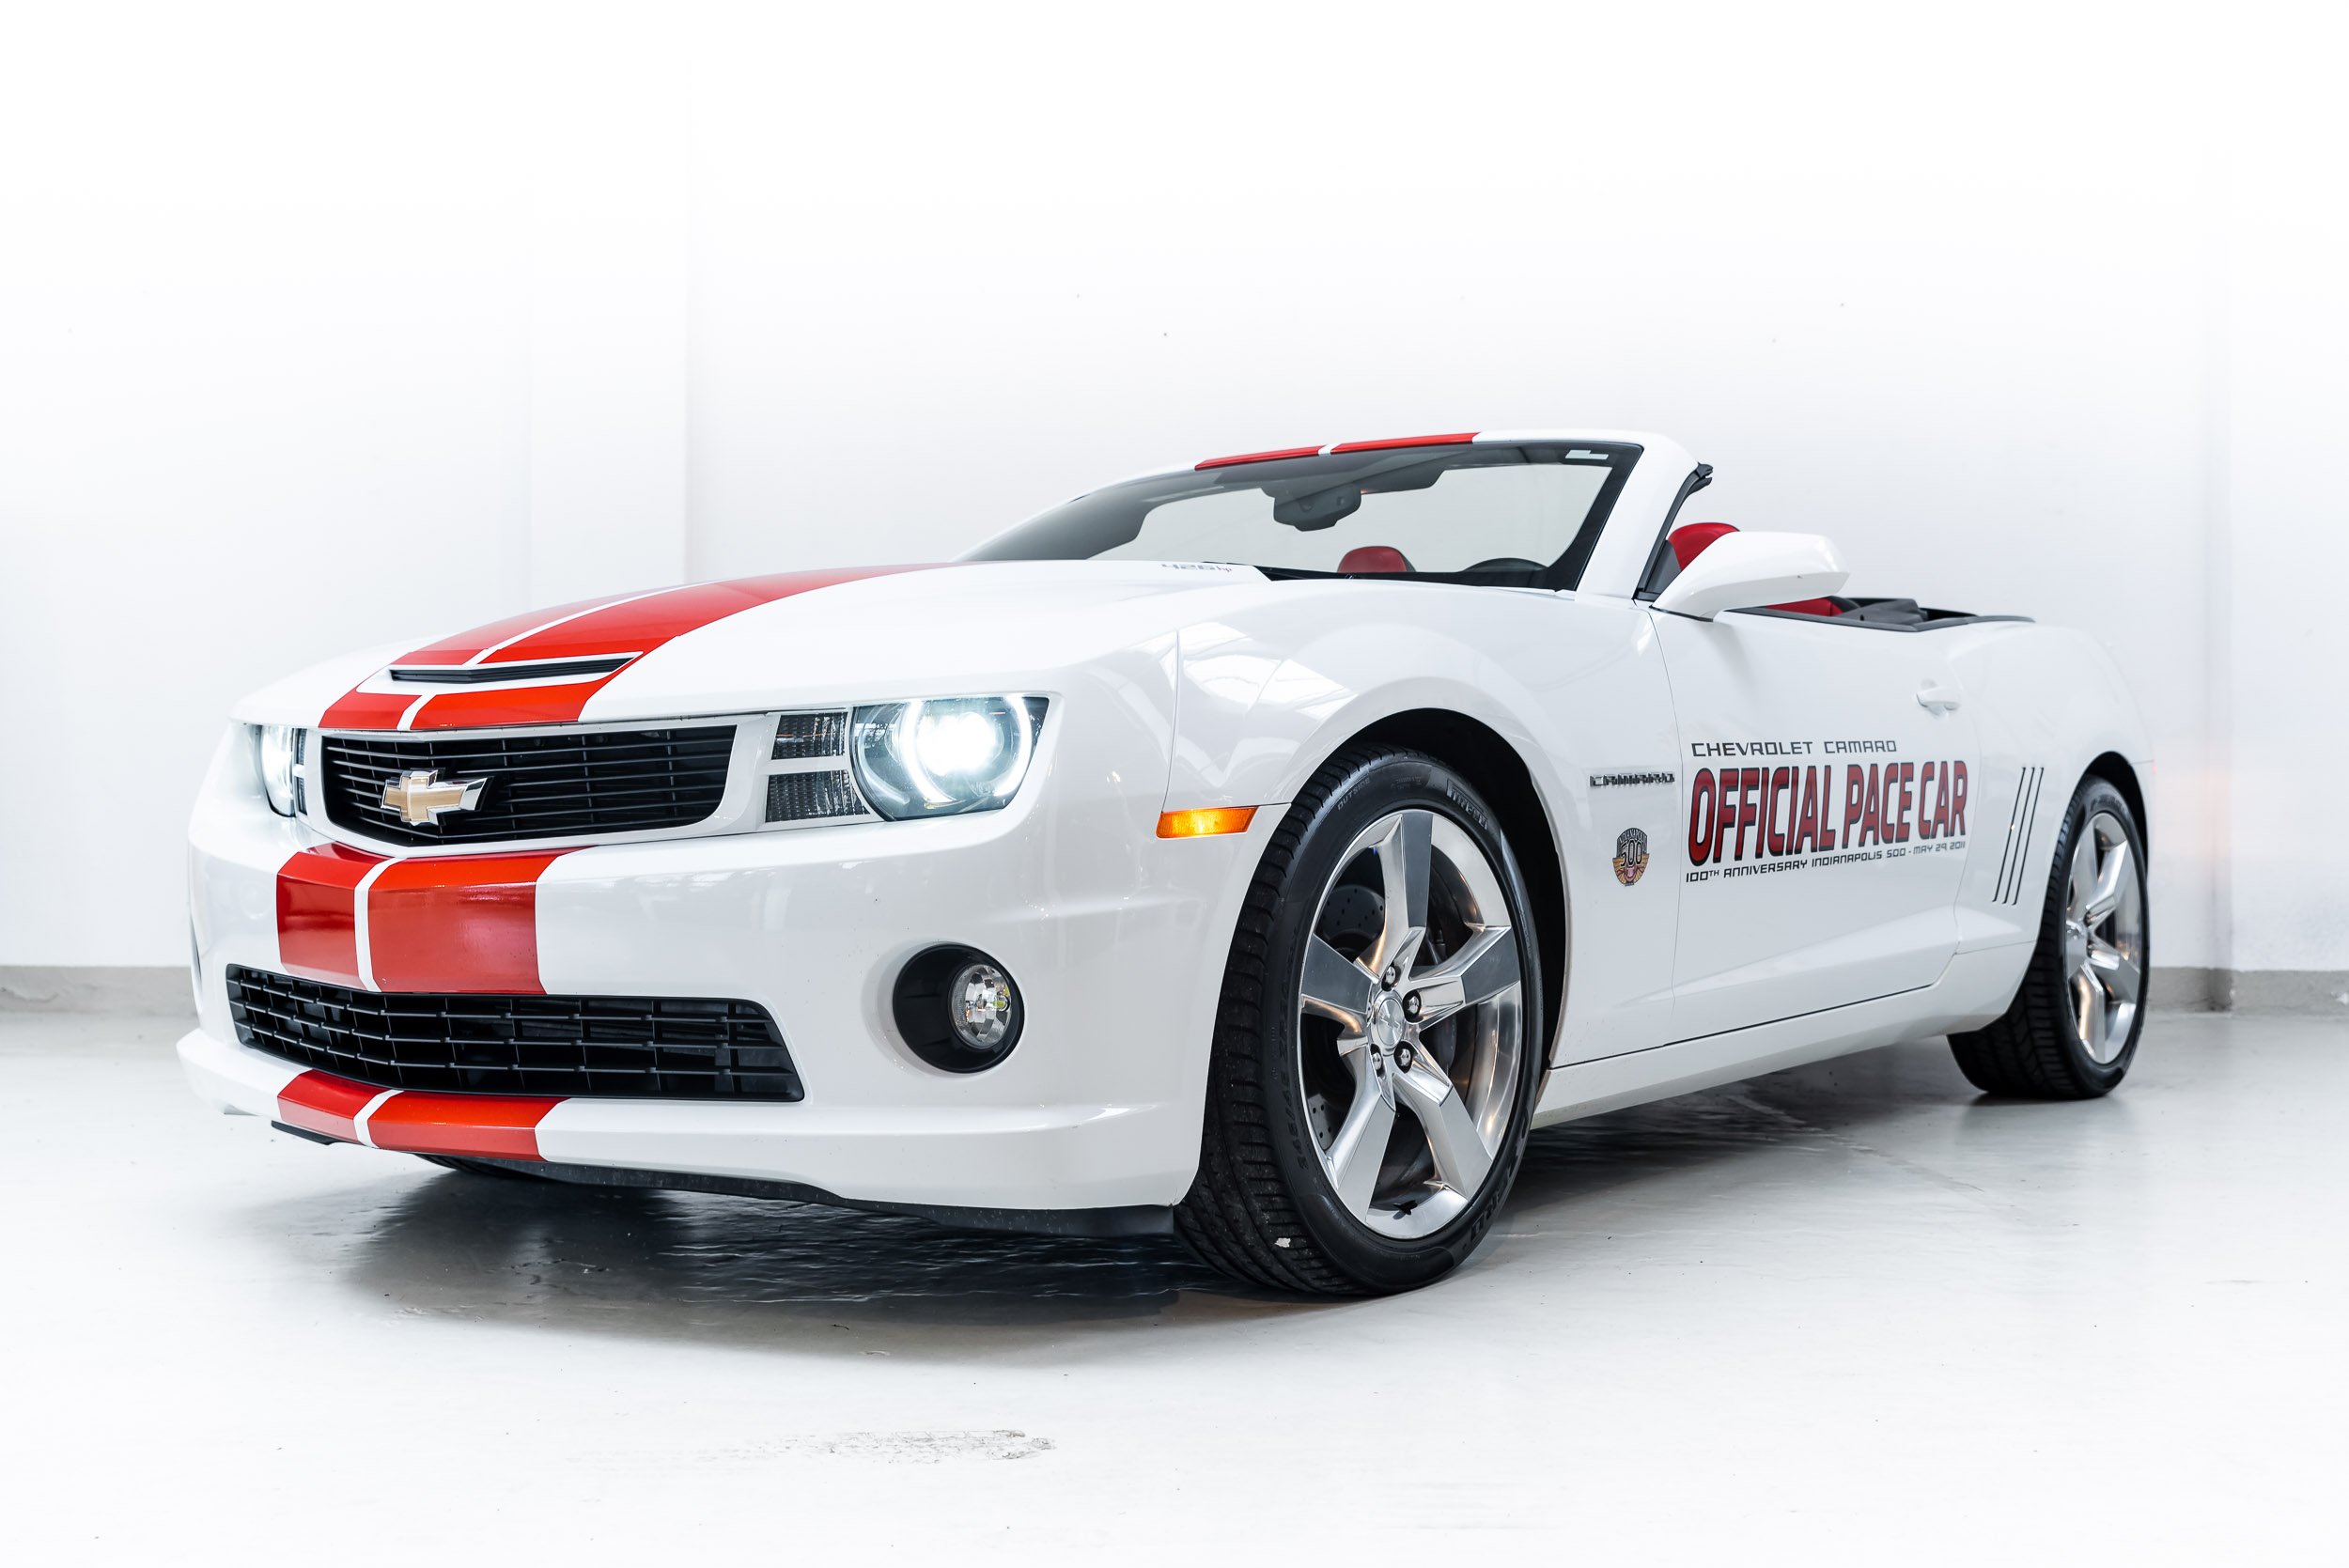 11 Chevrolet Camaro Indy 500 Pace Car 7 50 Classic Driver Market